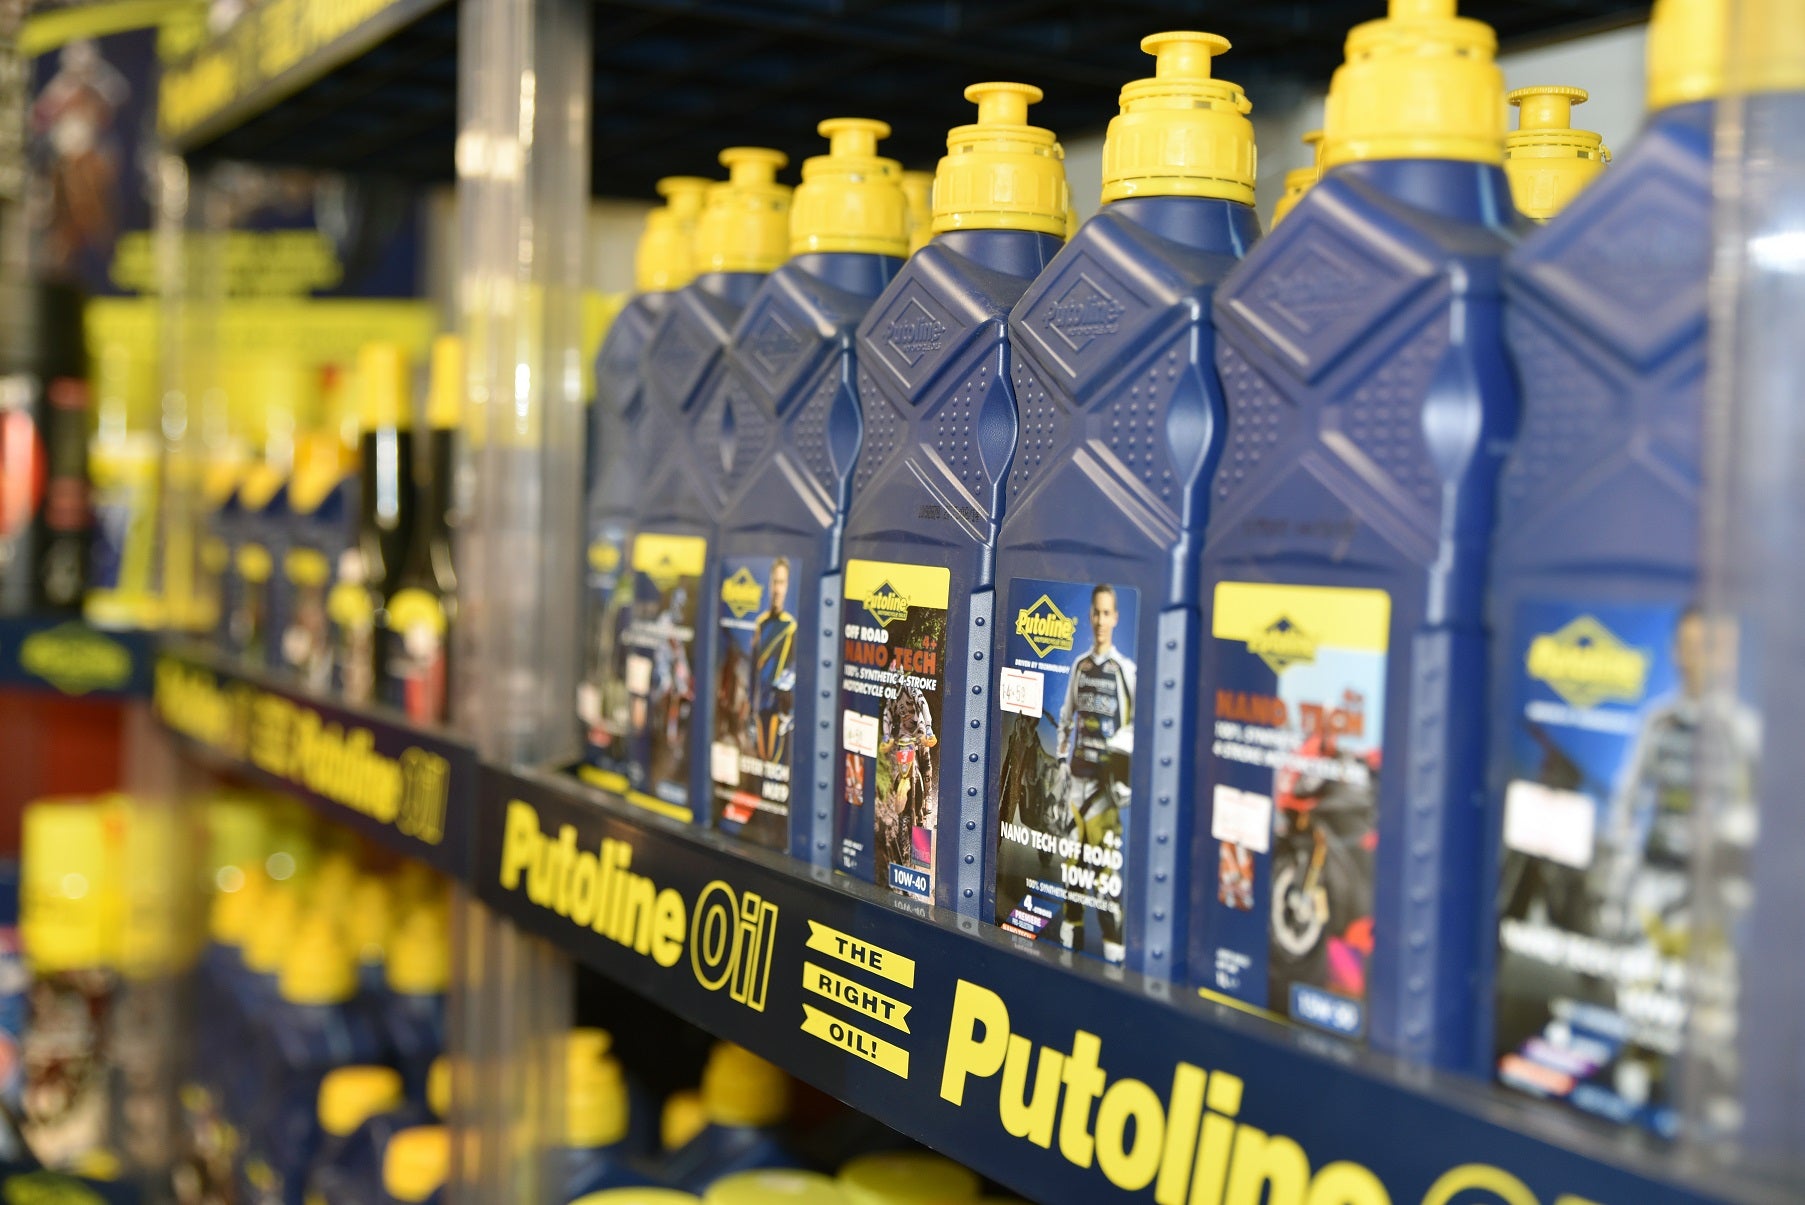 Driven by Technology - Putoline Oils